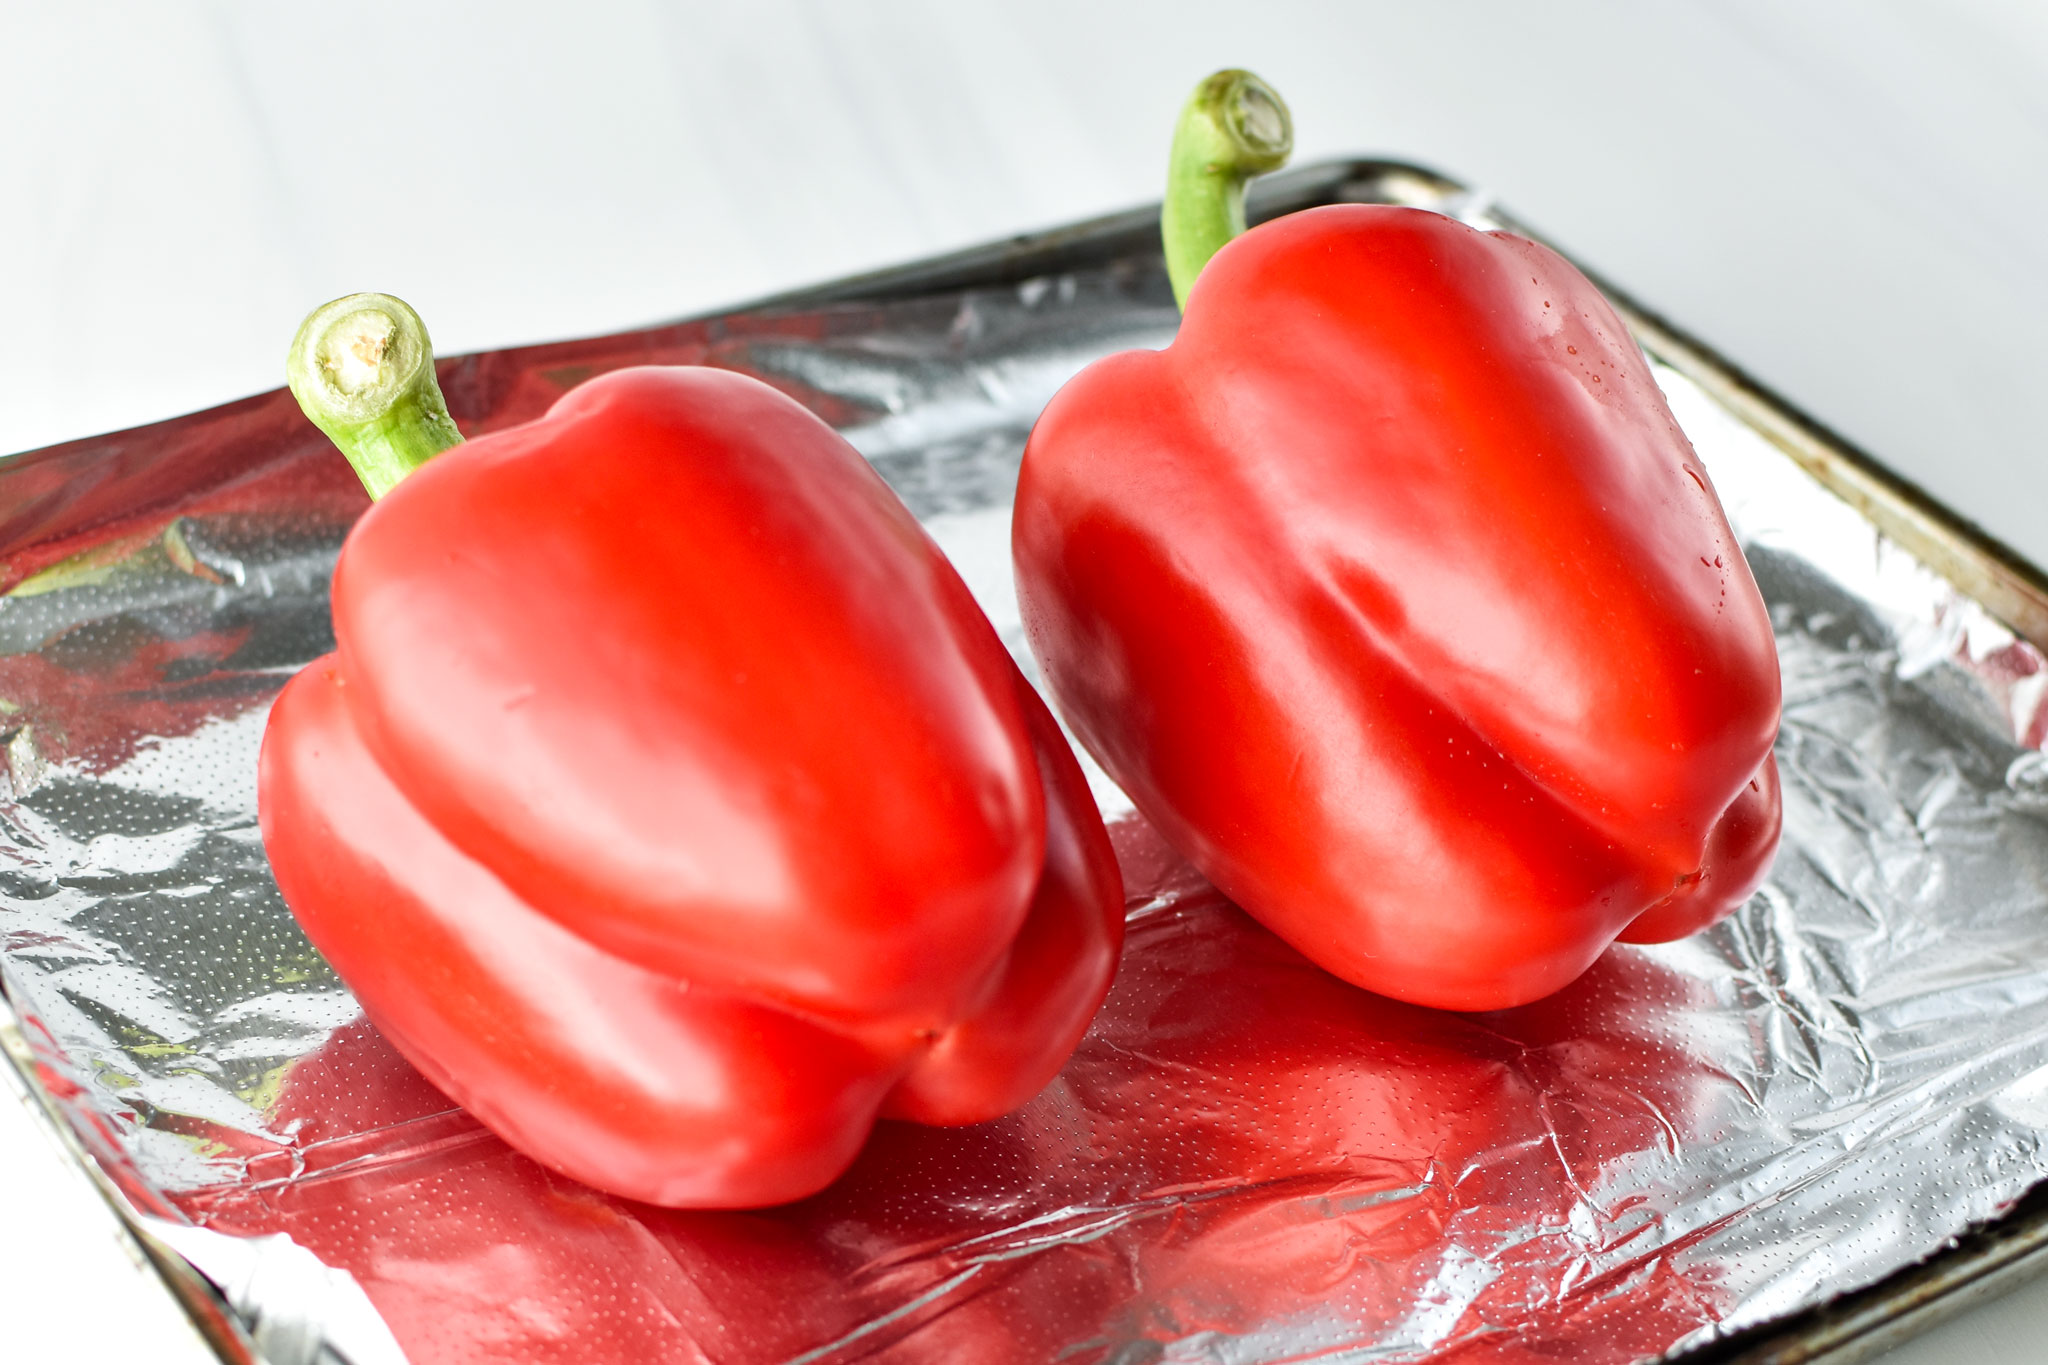 Store Bought vs Homemade Roasted Red Bell Peppers - Project Meal Plan